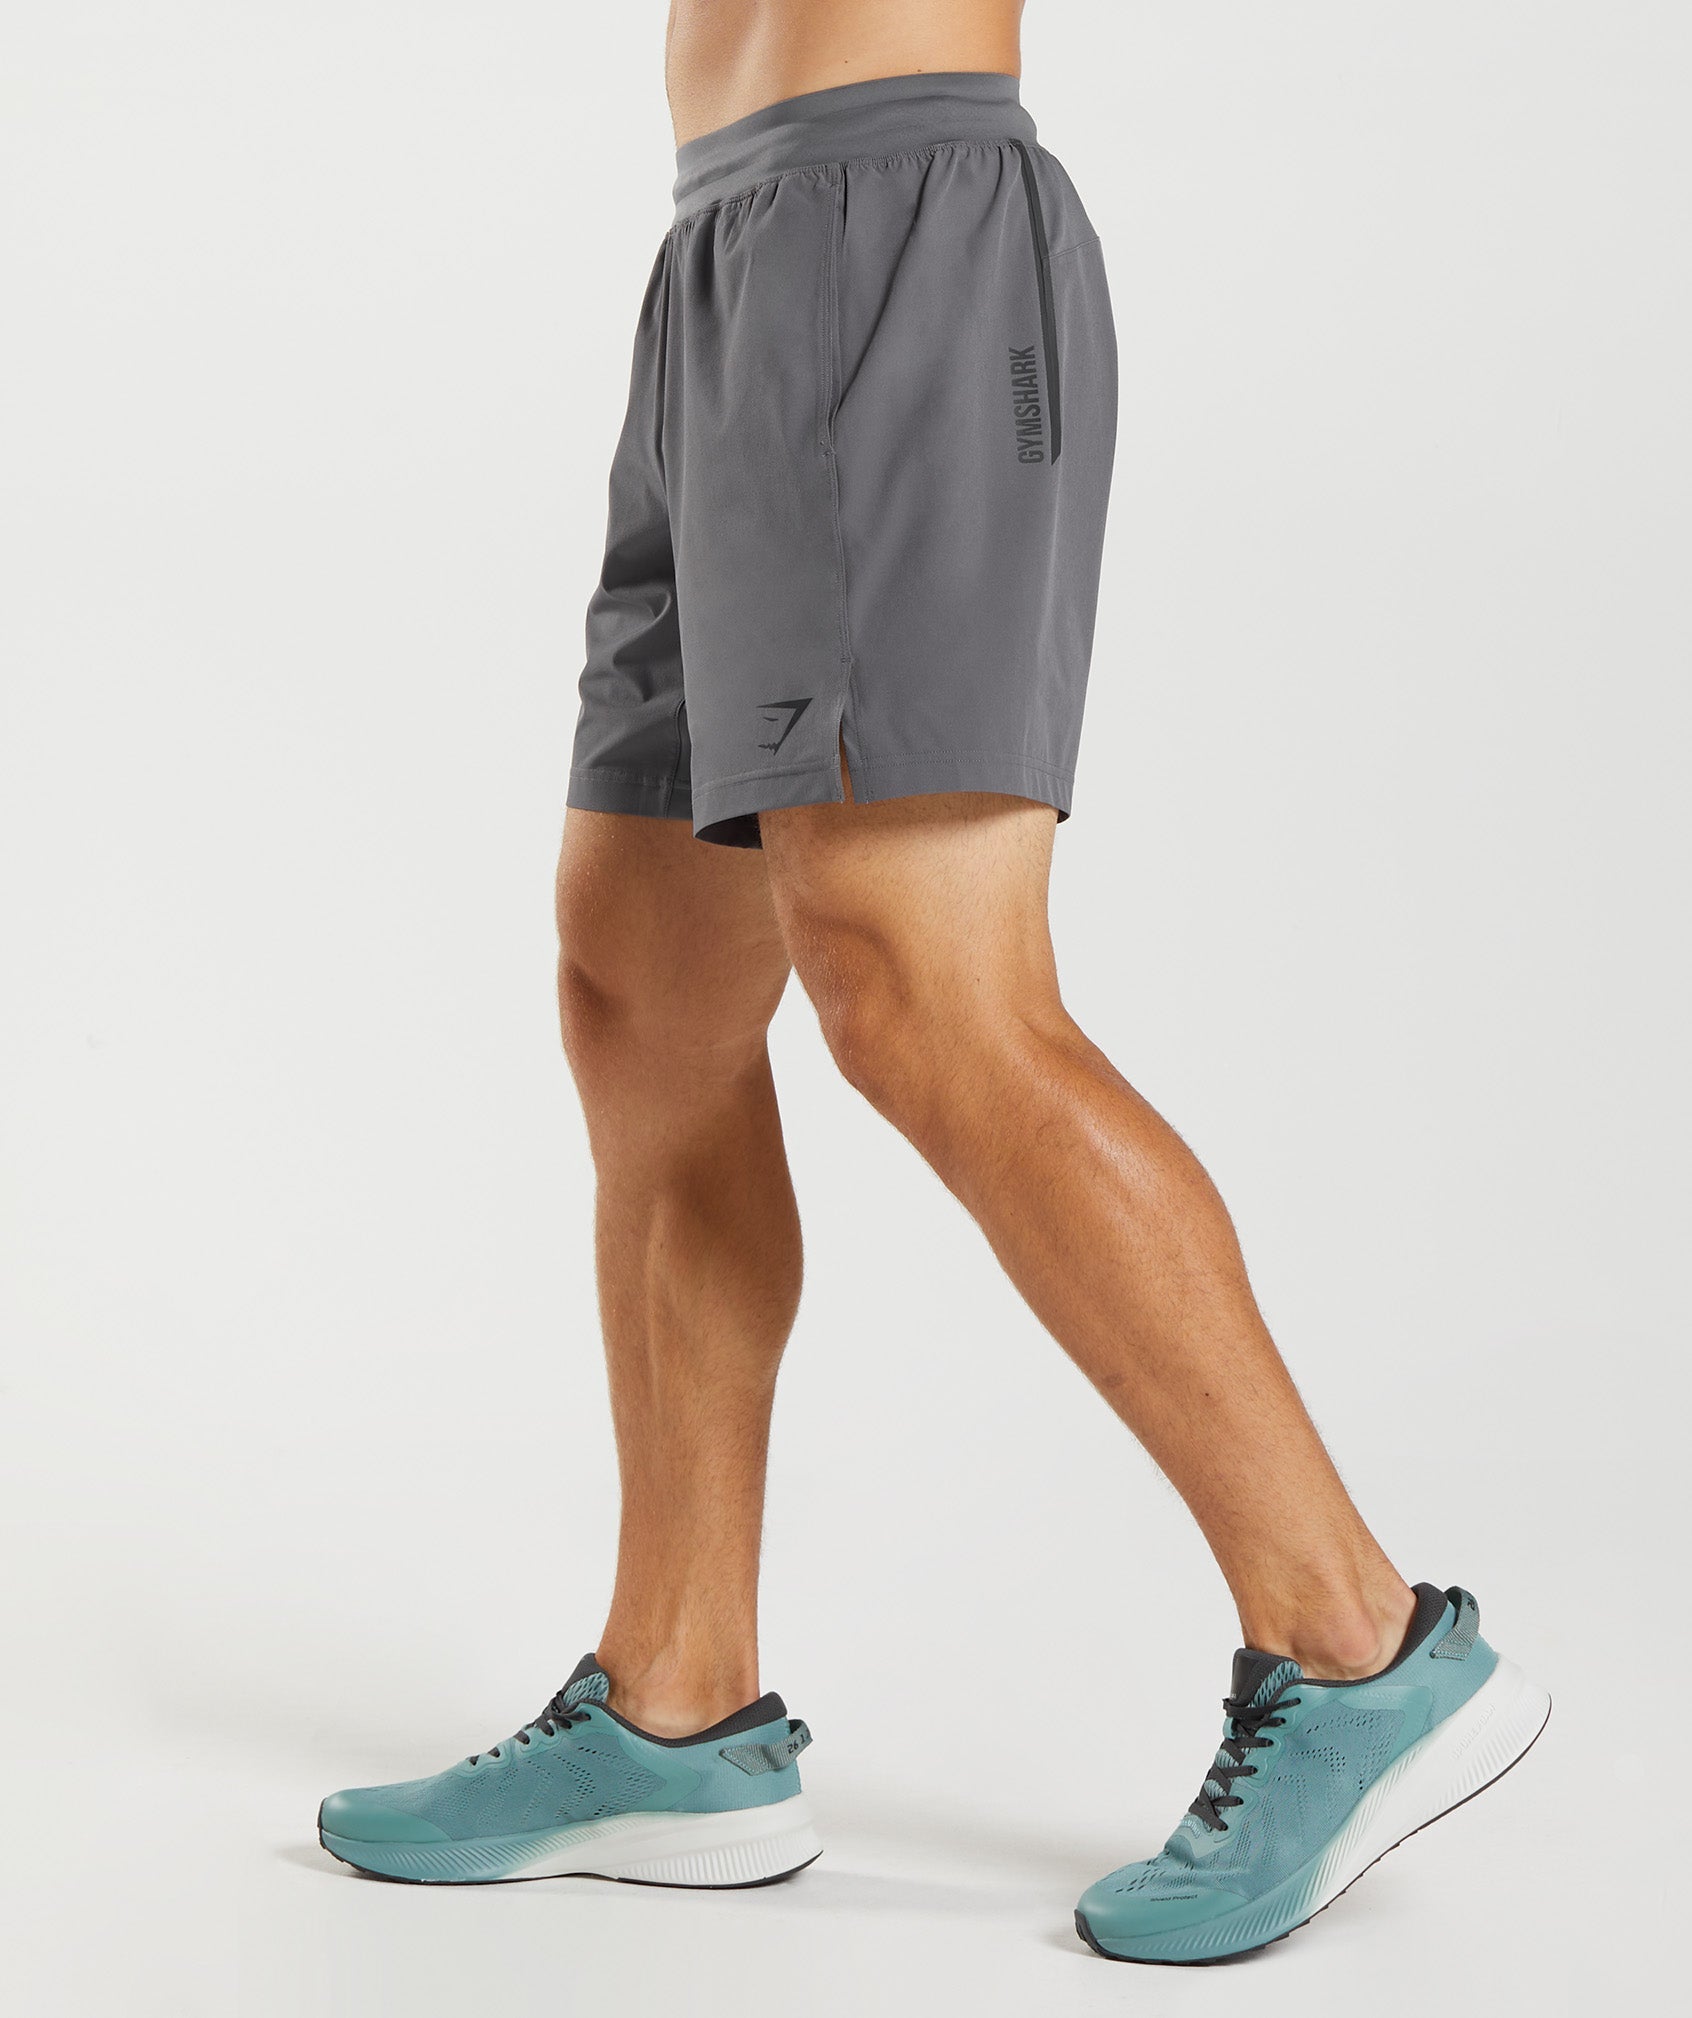 Apex 8" Function Shorts in Silhouette Grey